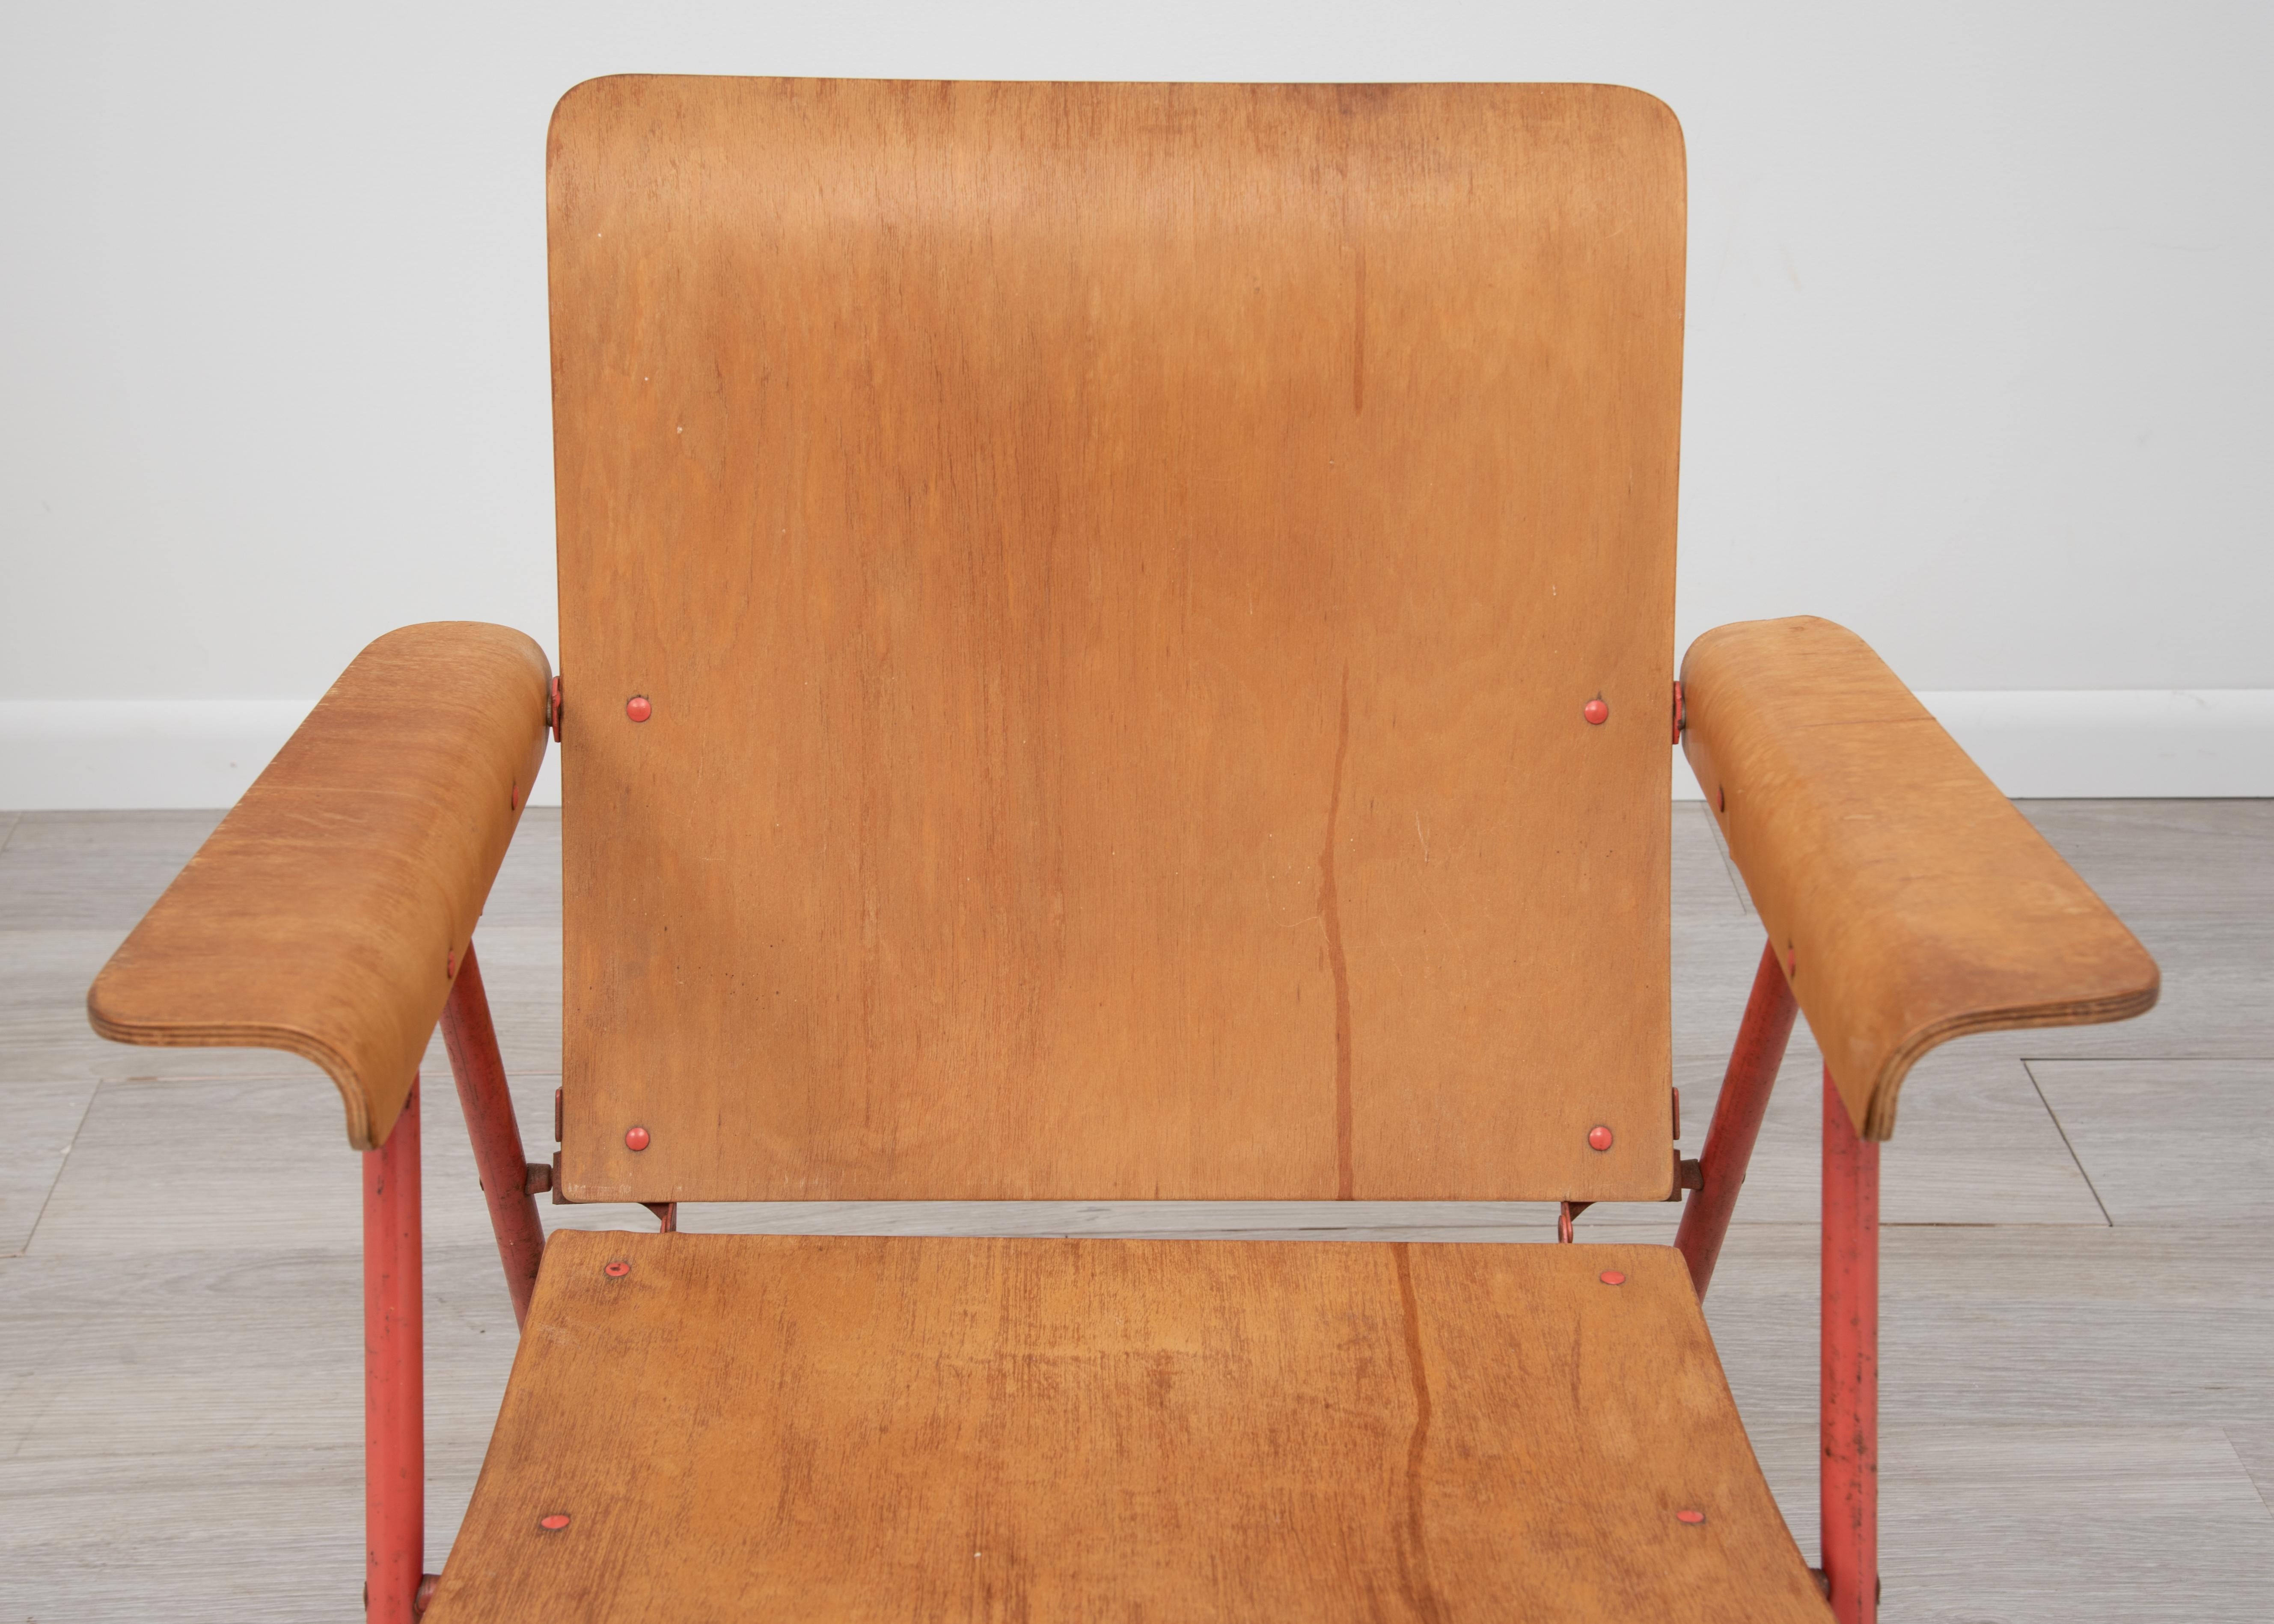 Samson Folding Chair Russel Wright Shwayder Bros Inc. 1950s In Good Condition For Sale In Forest Grove, PA